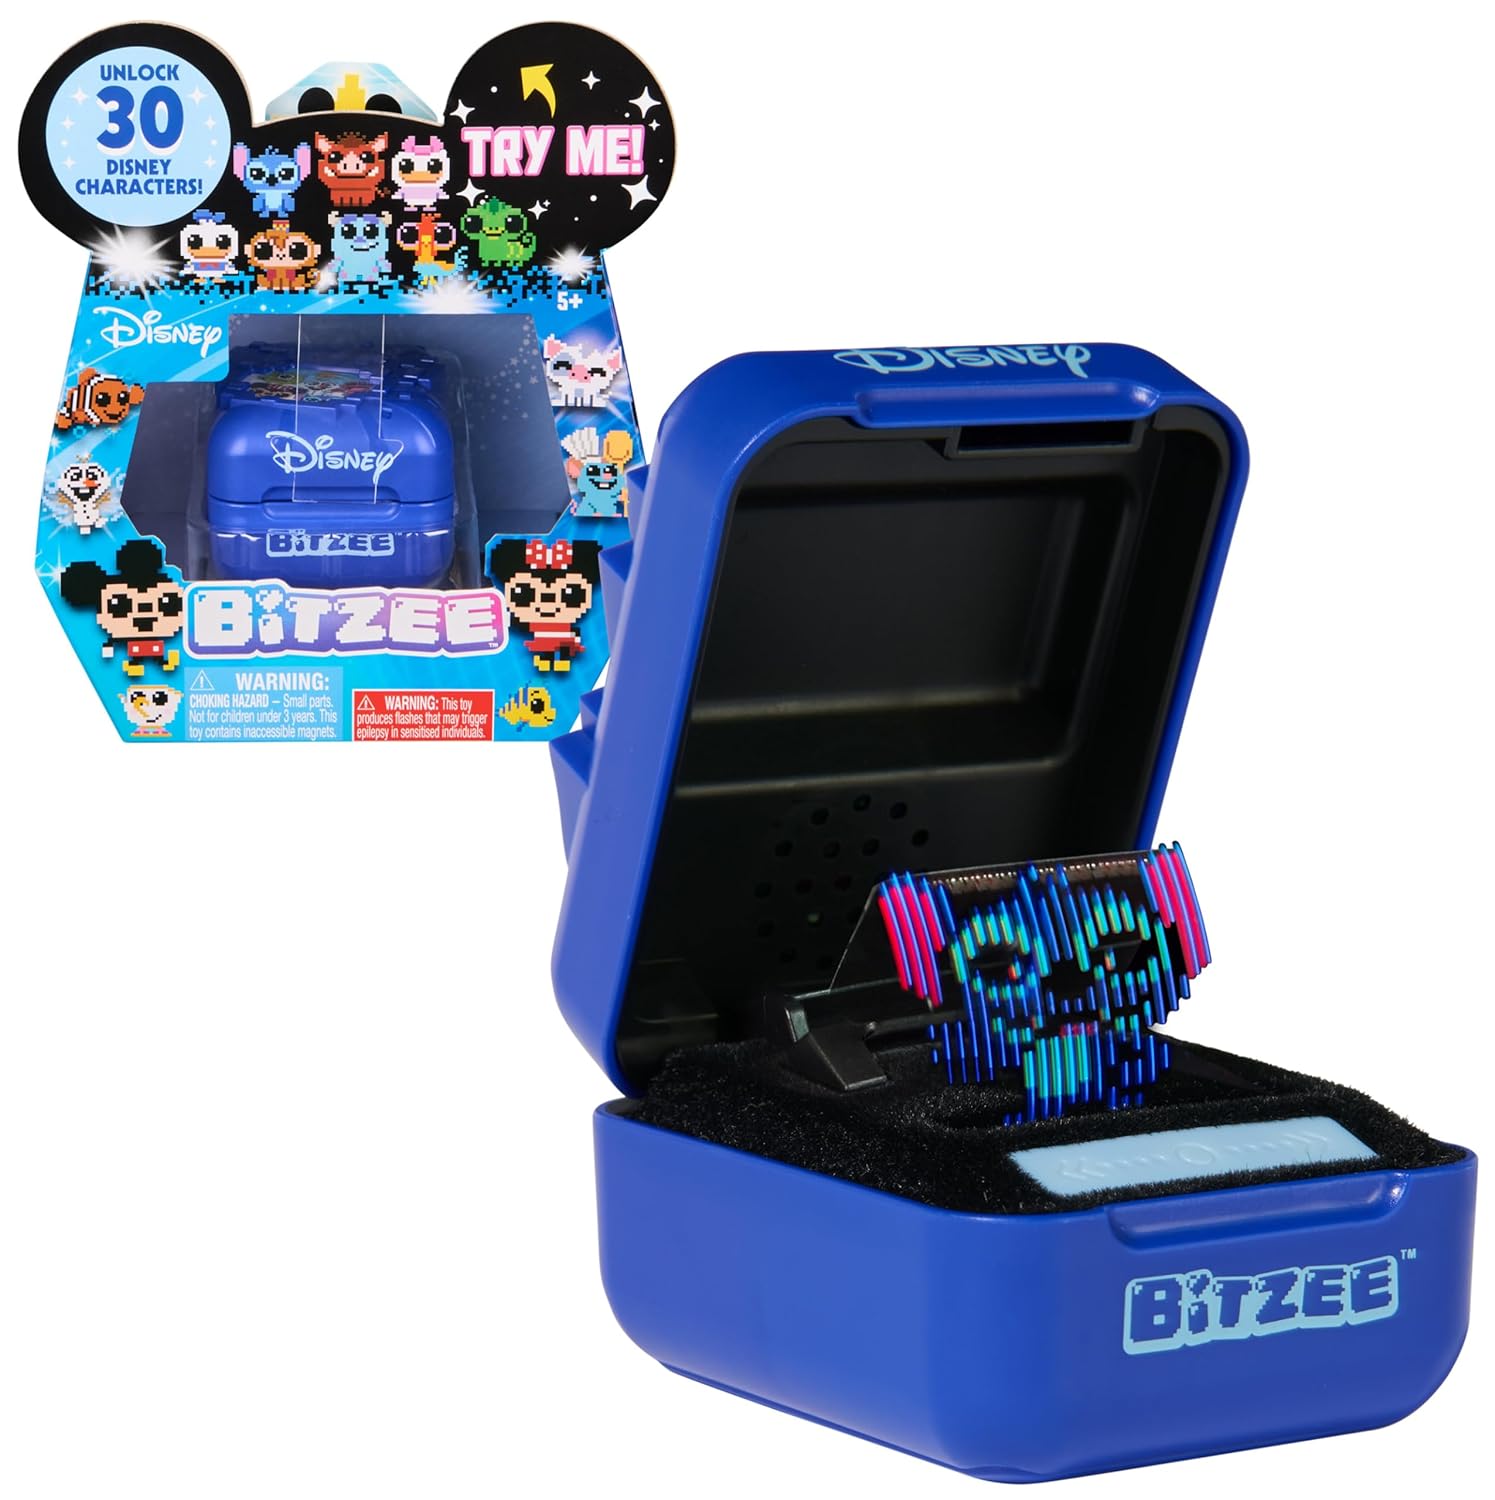 Disney Virtual Pet - Japanese Virtual Pet With Disney Characters - Mickey Mouse, Minnie Mouse, Nemo, Frozen, Moana, The Lion King, Beauty and the Beast